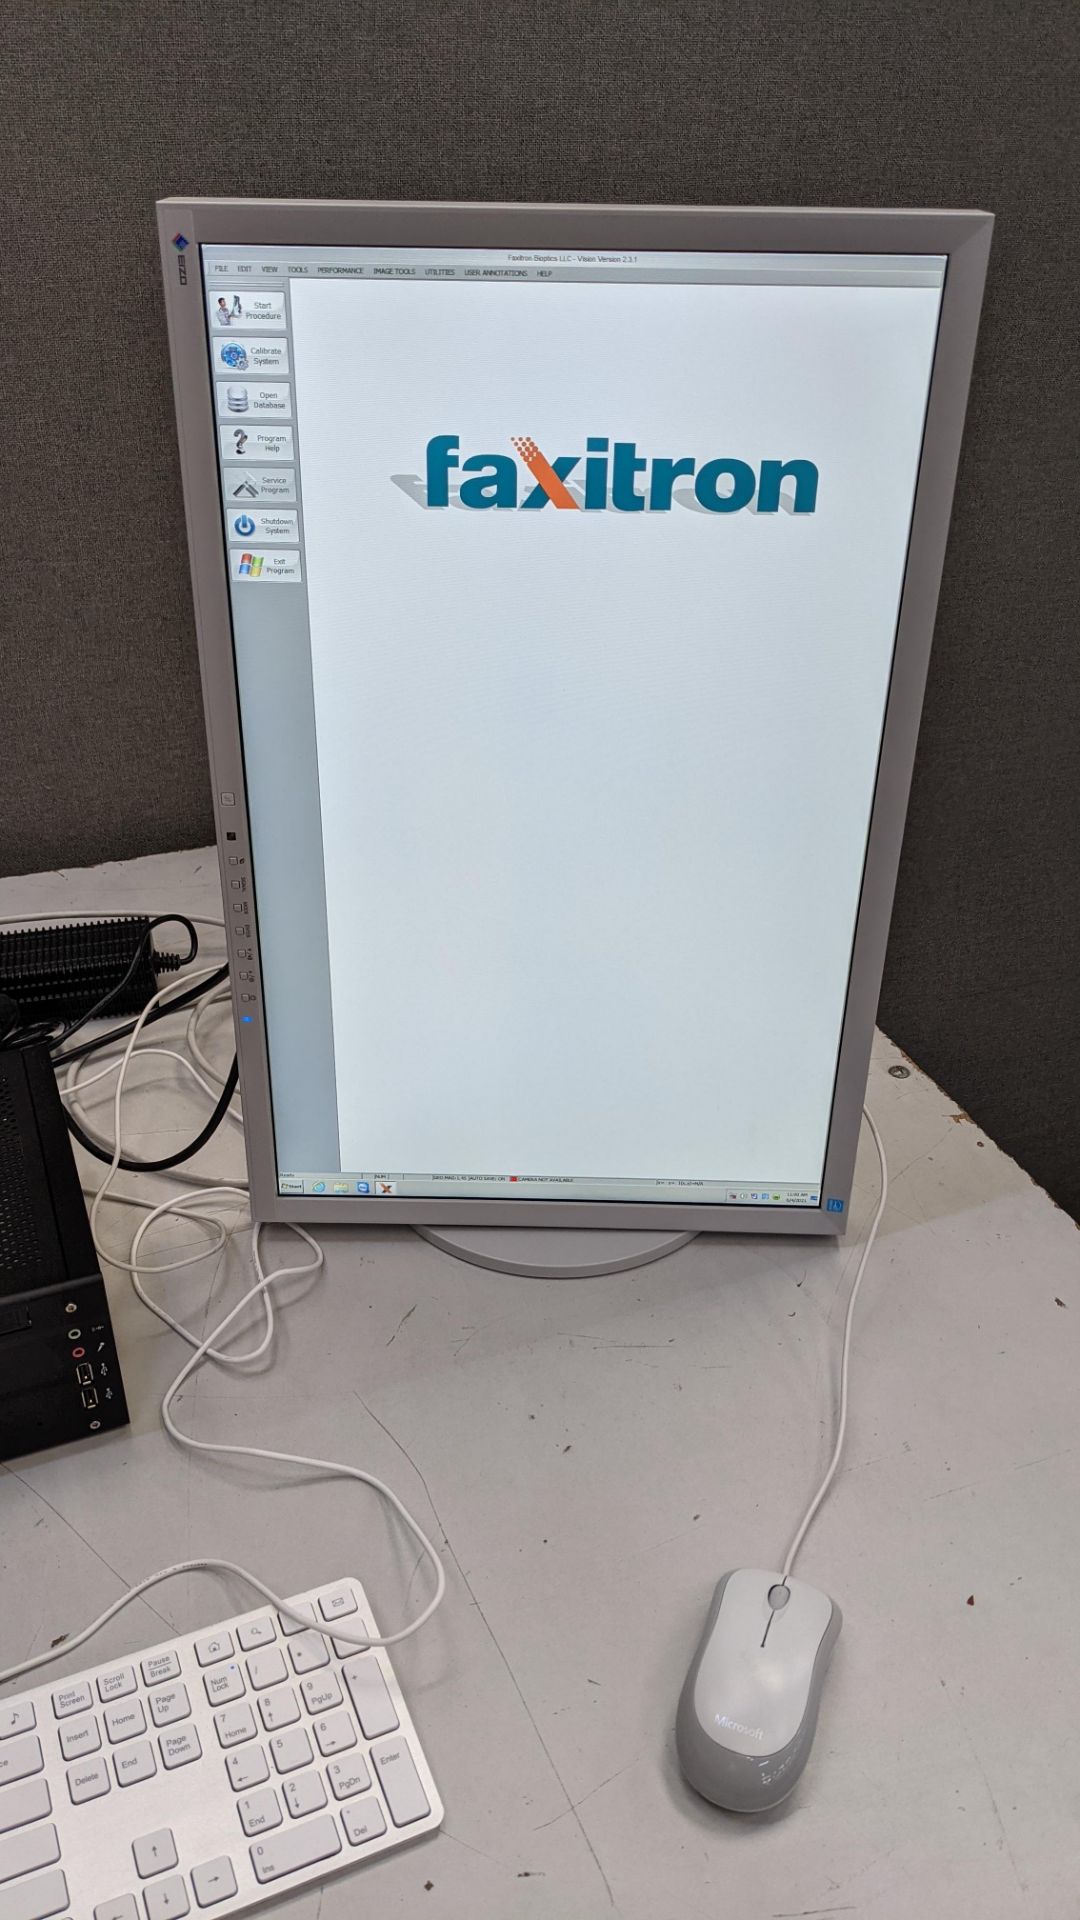 Faxitron CoreVision digital specimen system, purchased new in 2015. - Image 7 of 24